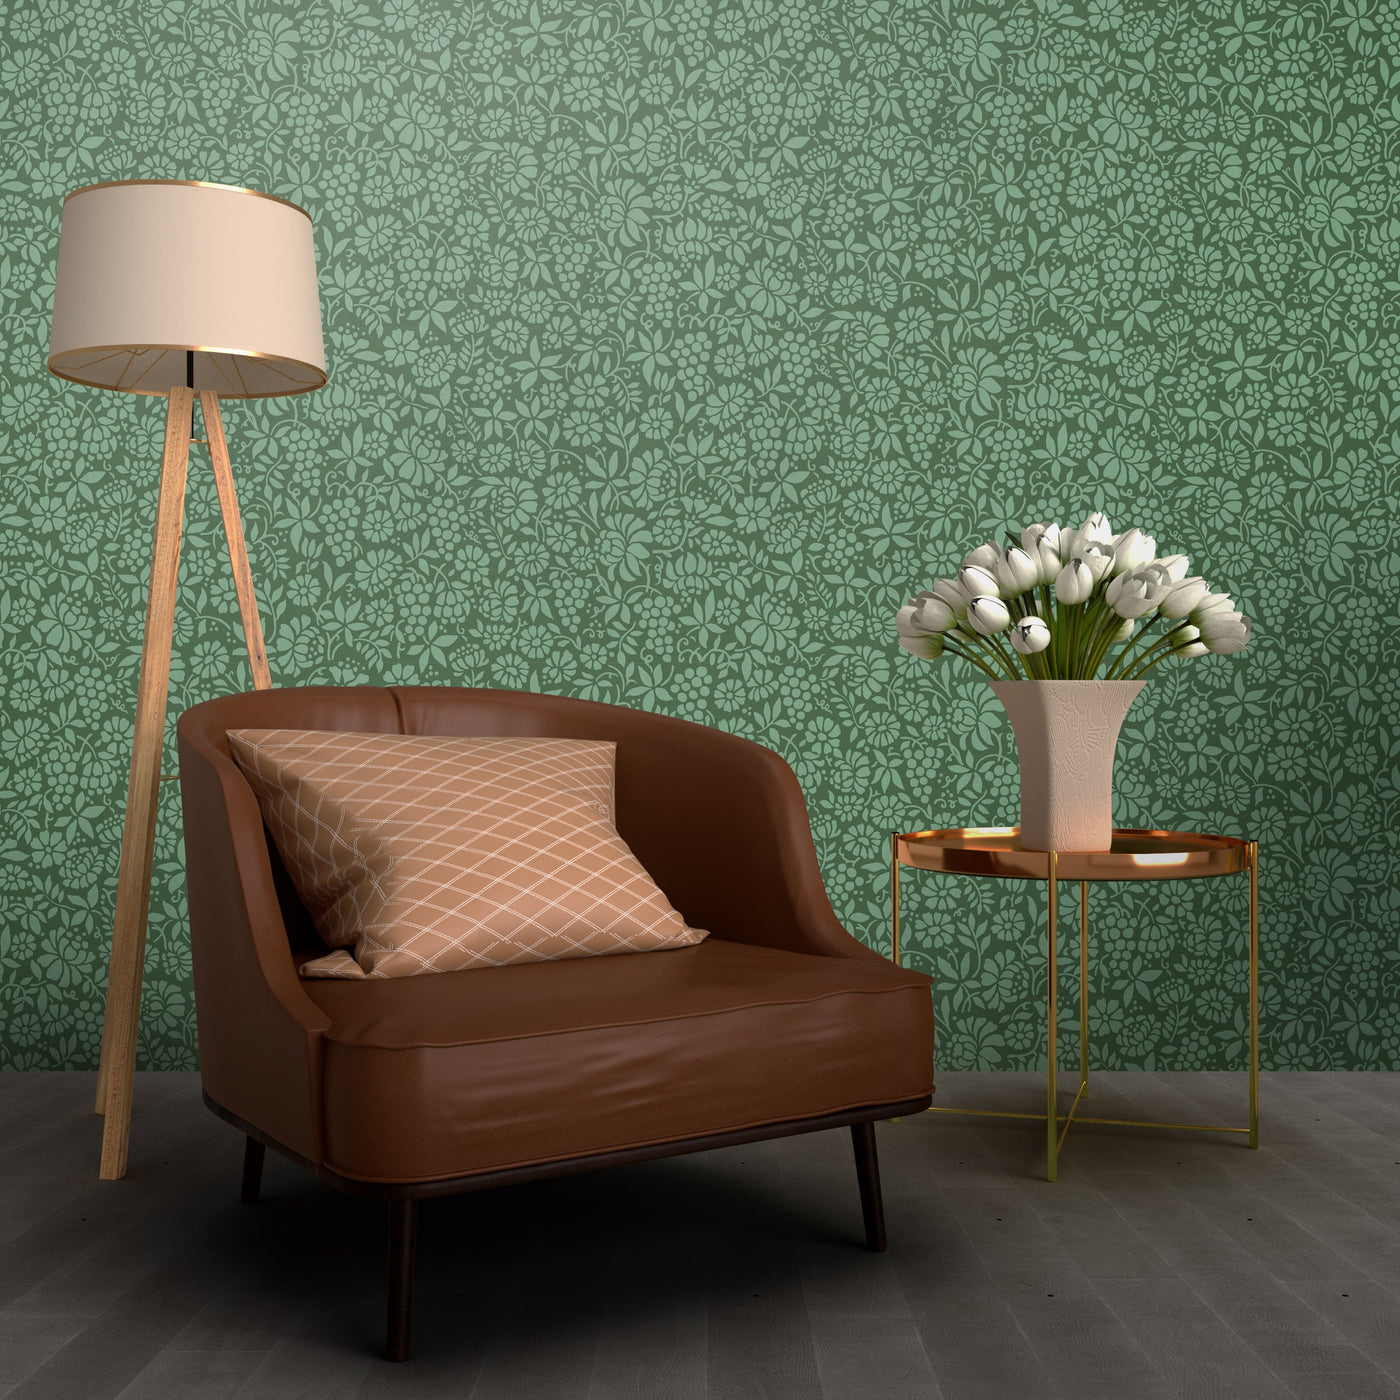 Alma's Authentic Vintage 1950's Reproduction Wallpapers